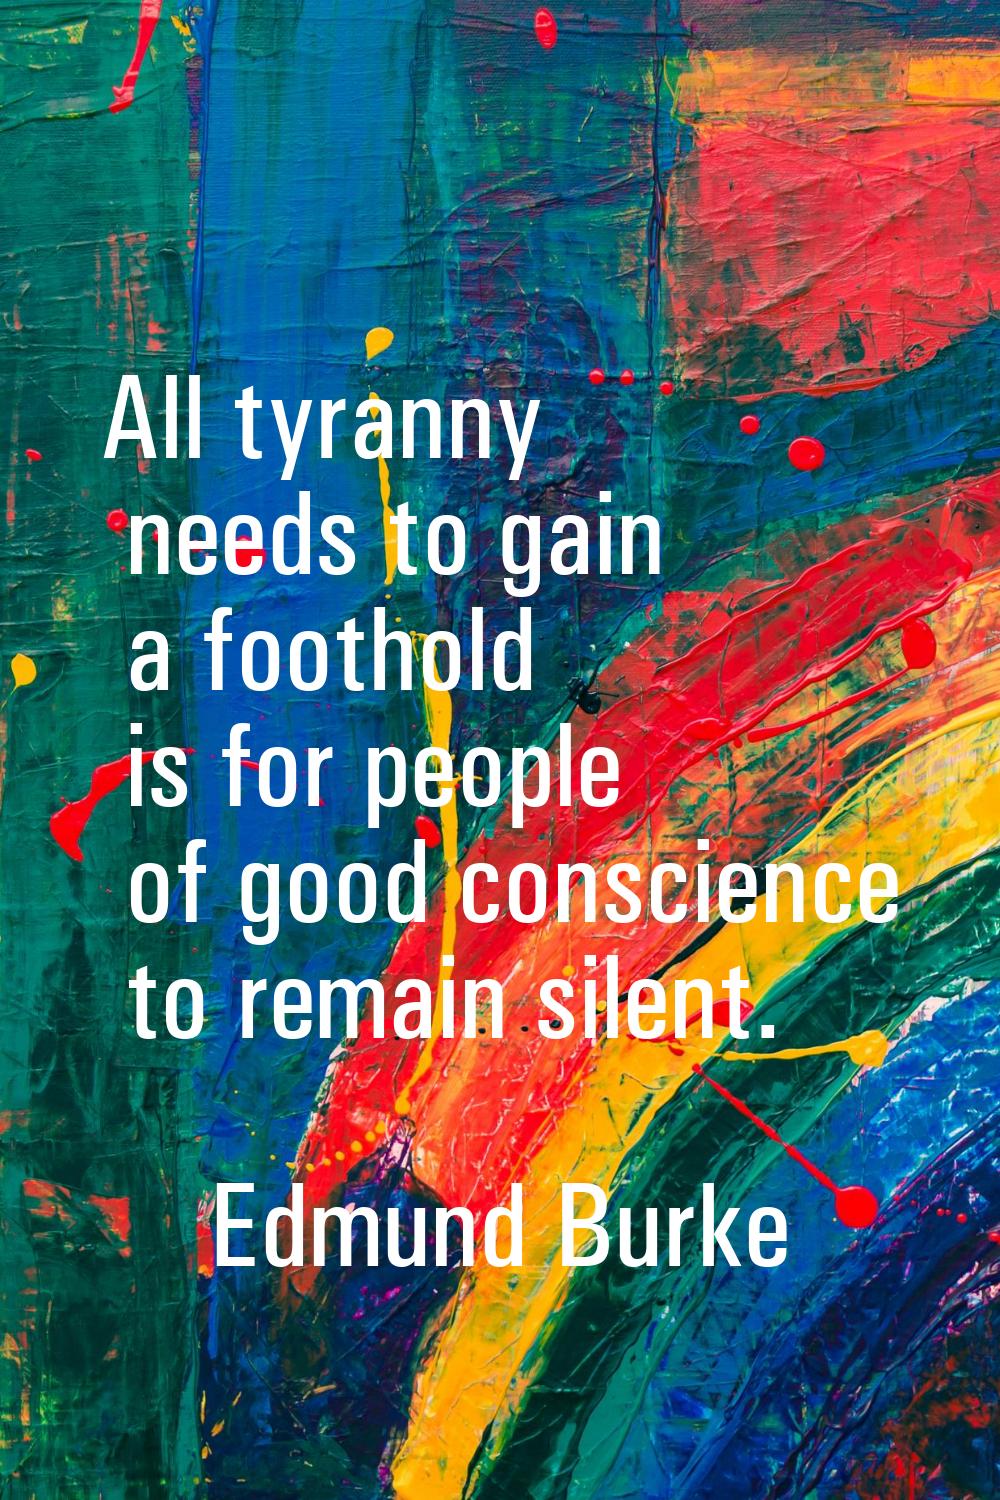 All tyranny needs to gain a foothold is for people of good conscience to remain silent.